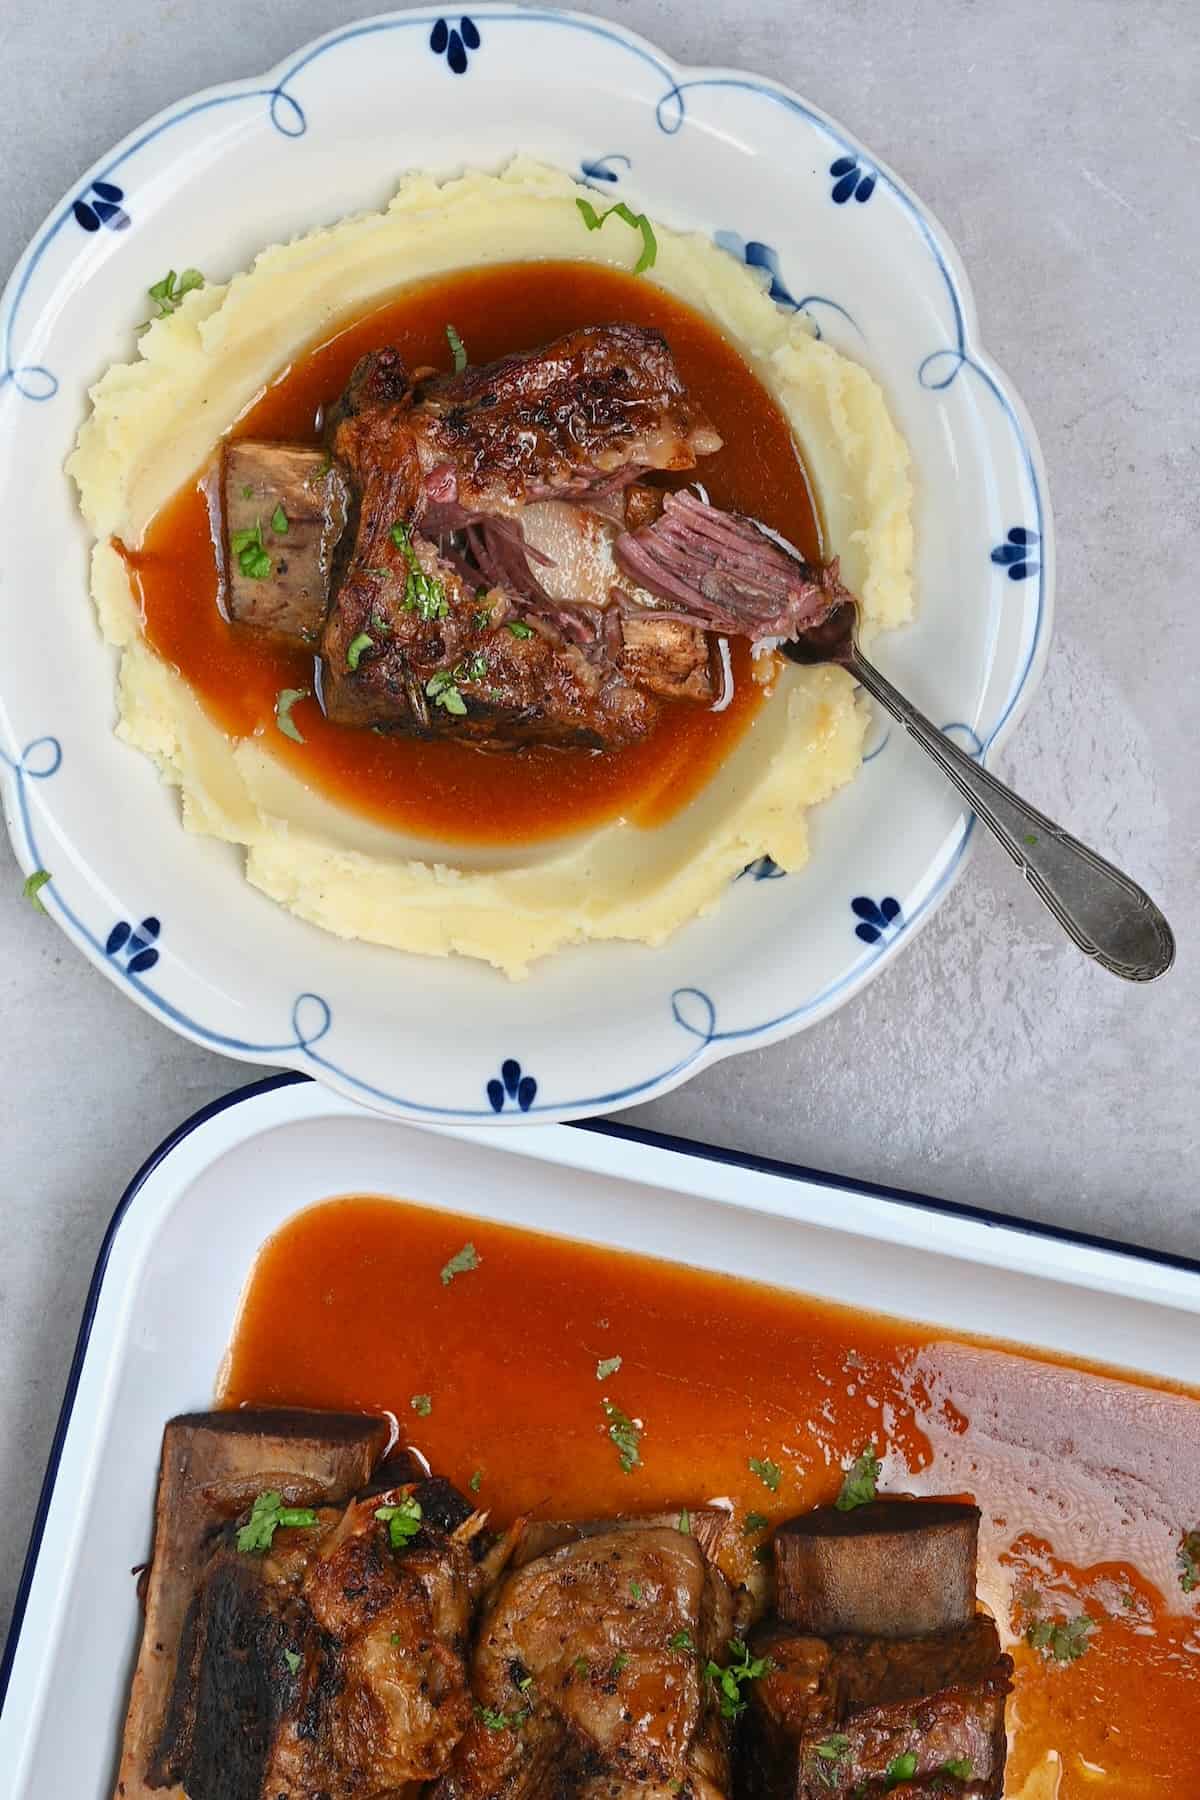 A serving of short ribs with mashed potatoes